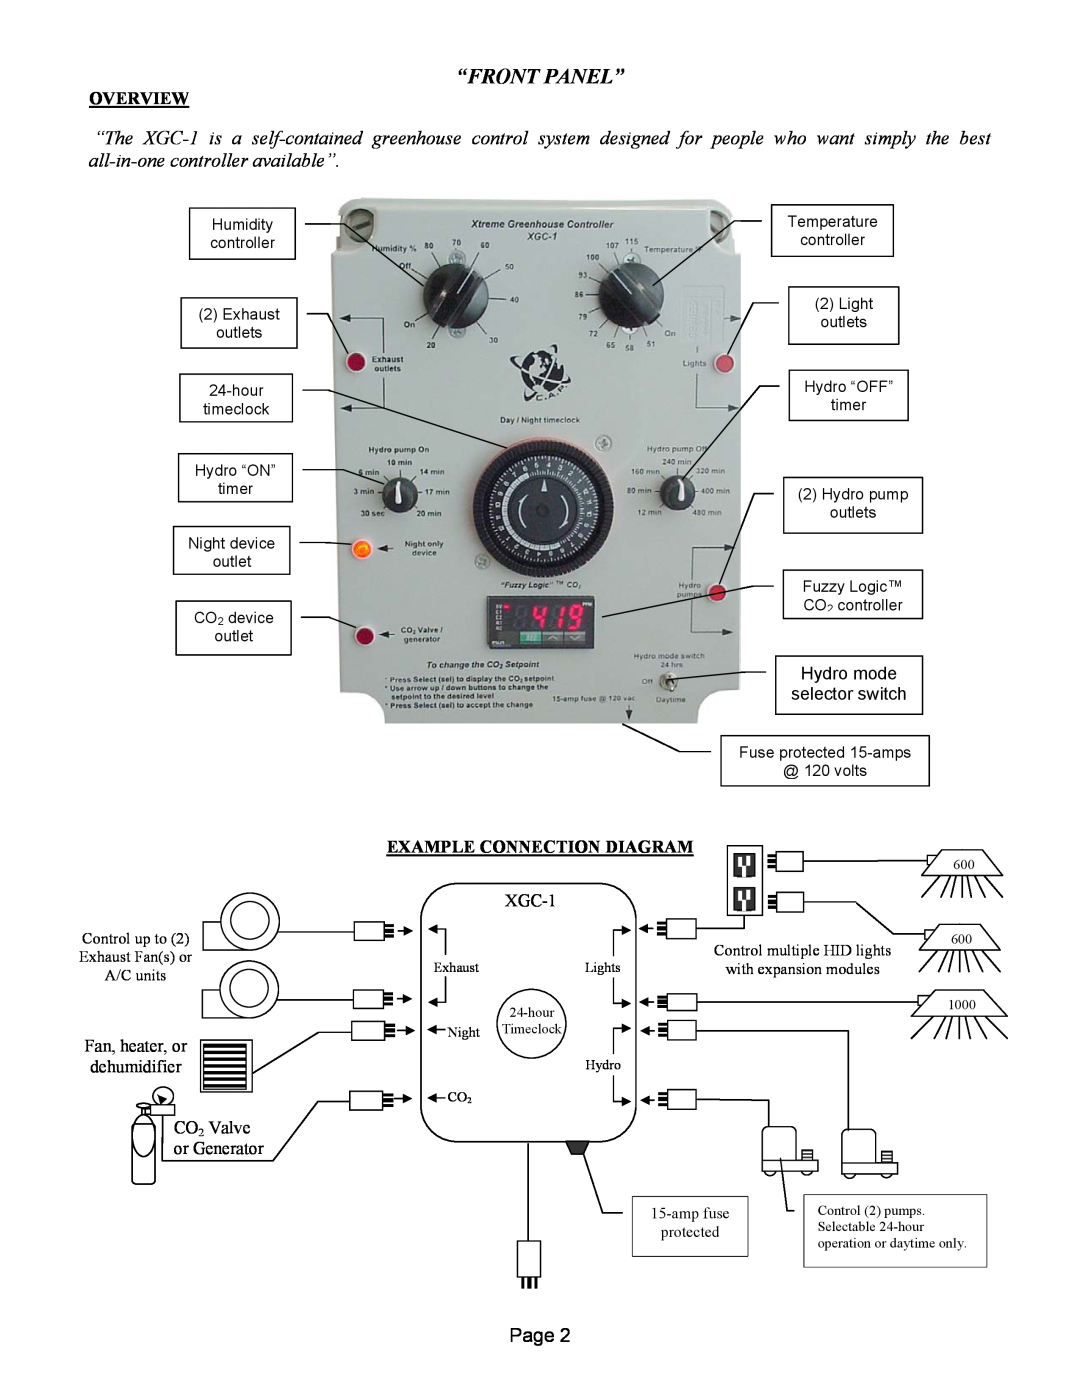 XtremeMac XGC-1 warranty “Front Panel”, Example Connection Diagram, Page, Overview, Hydro mode selector switch 